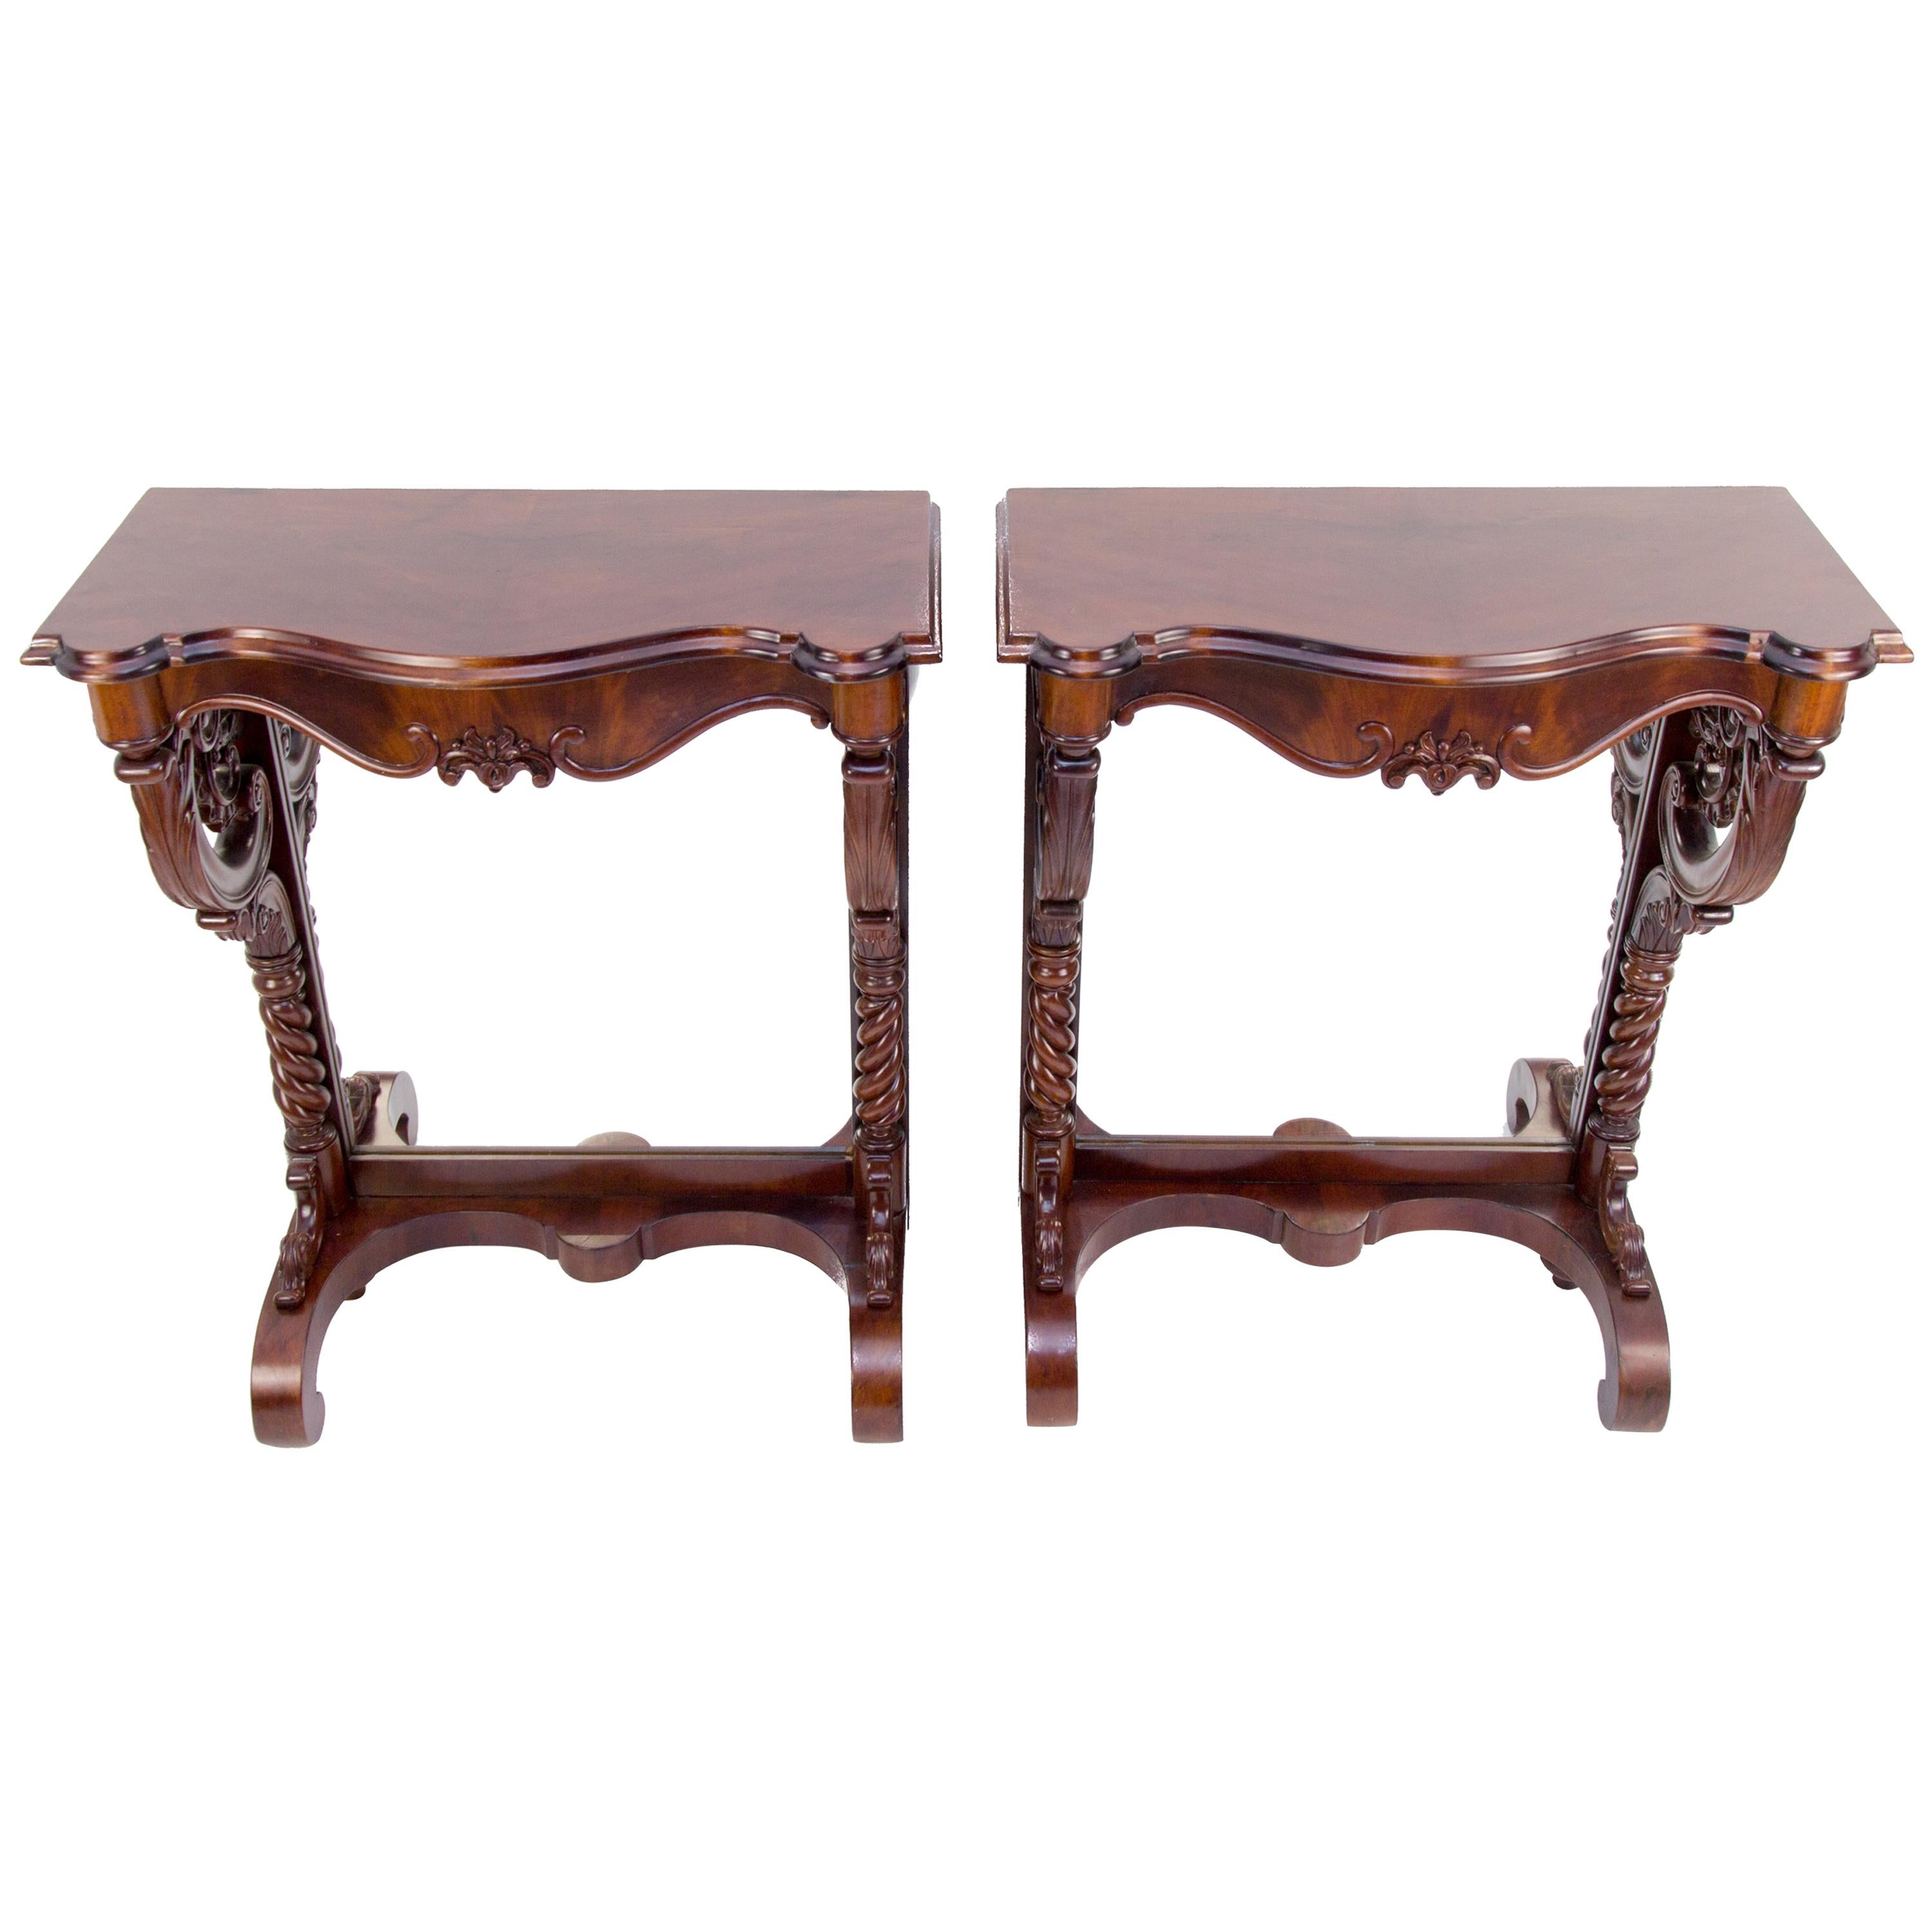 Pair of 19th Century Regency Style Walnut and Mirror Wall Console Tables